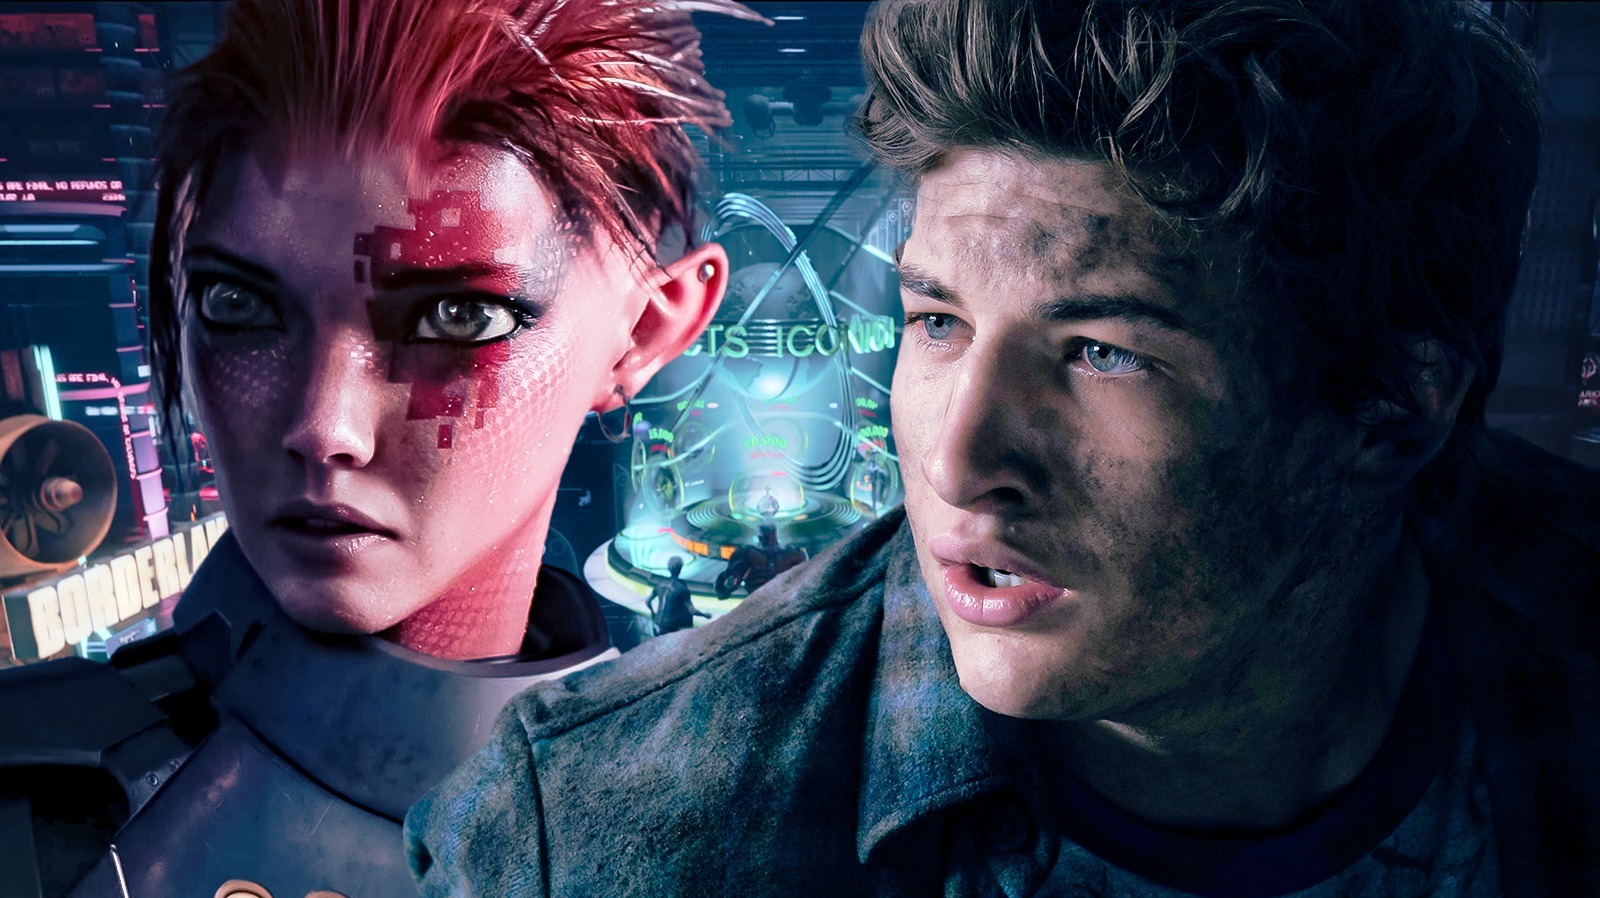 Ready Player One (2018): Where to Watch and Stream Online